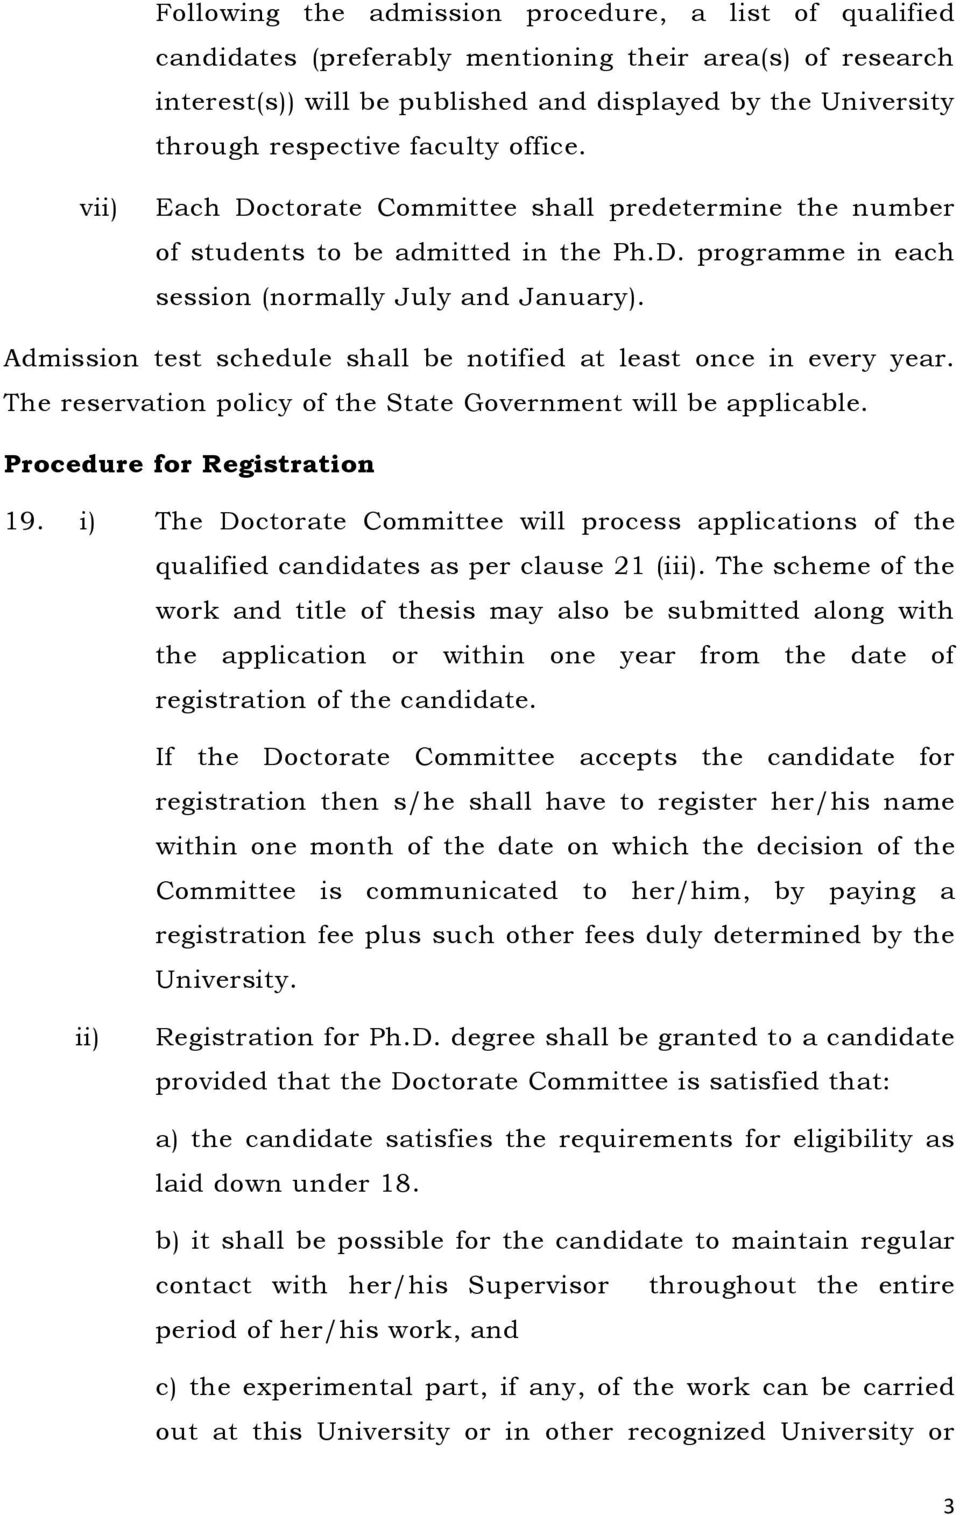 Admission test schedule shall be notified at least once in every year. The reservation policy of the State Government will be applicable. Procedure for Registration 19.